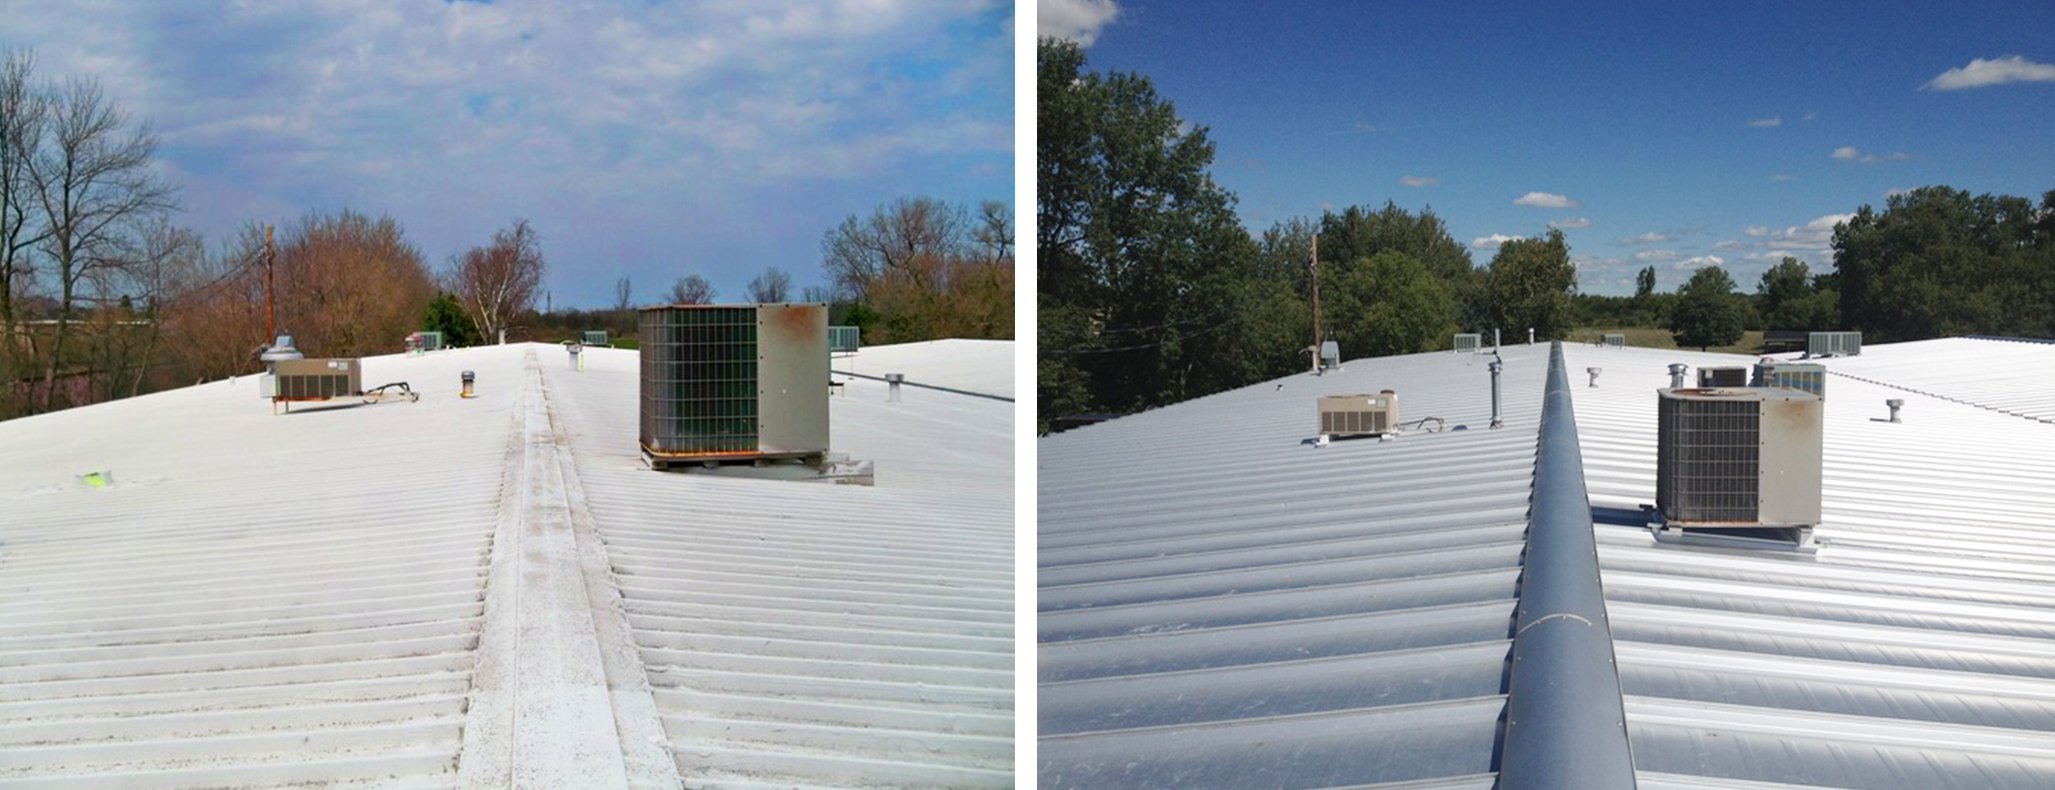  The difference between an old metal roof and new metal roof can be seen on a large industrial building in a wooded setting. 